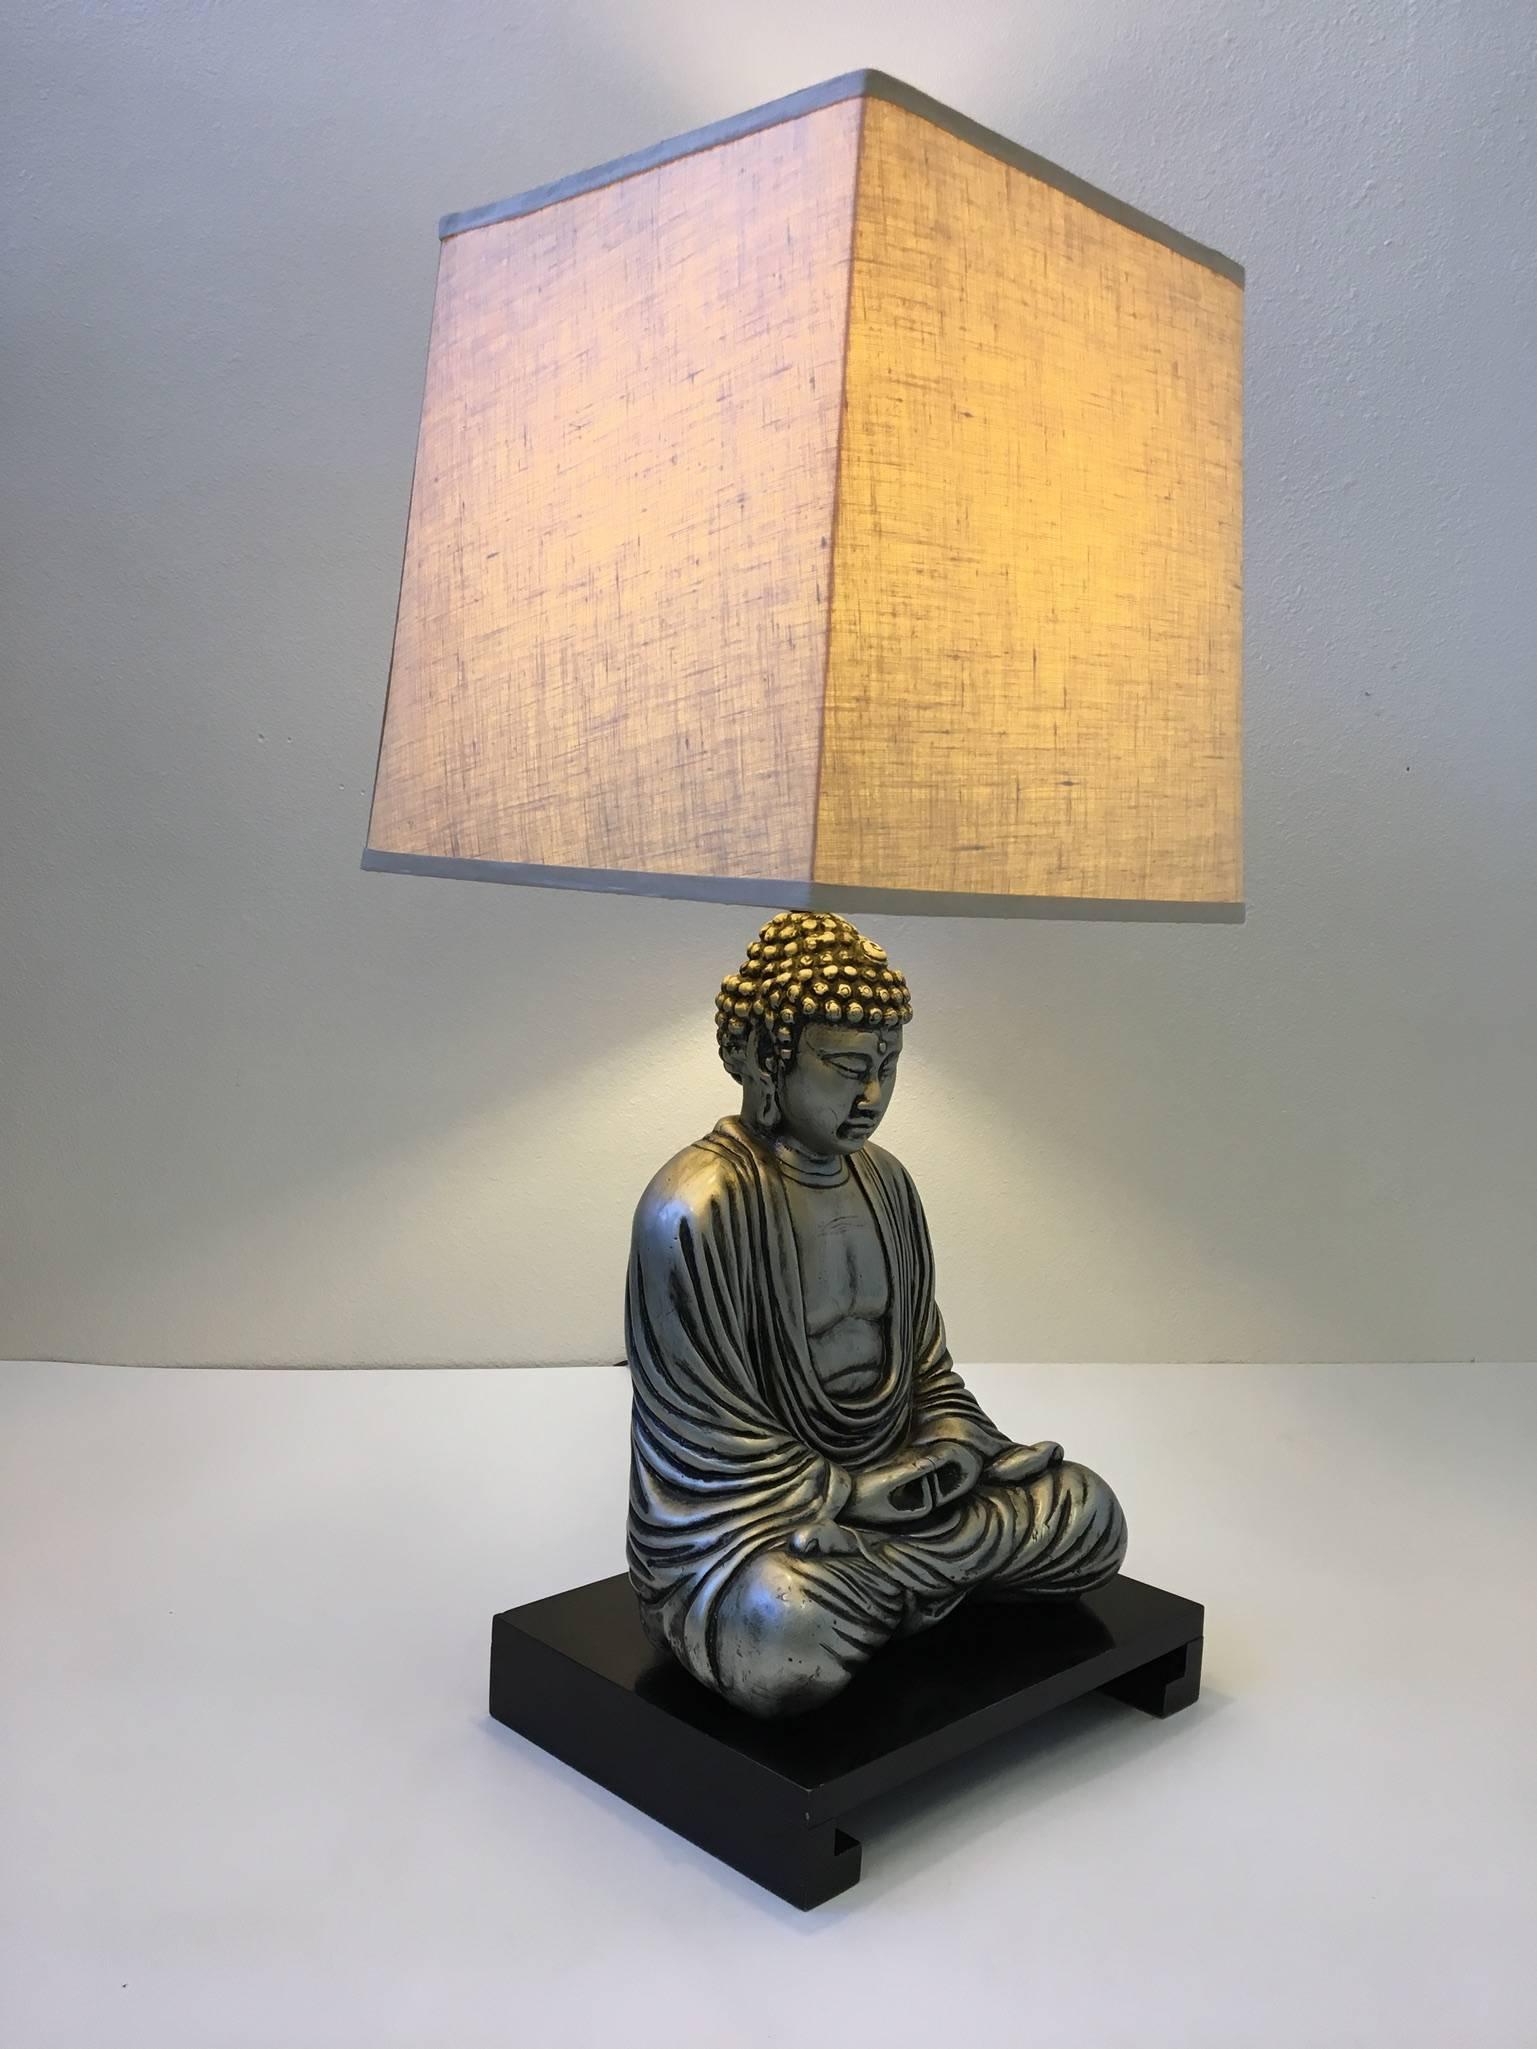 A beautiful silver finished and black lacquered Buddha sculpture table lamp in the manner of James Mont. The lamp has been newly rewired with nickel hardware. The Vanilla linen shade is original.
Dimensions: 36.75